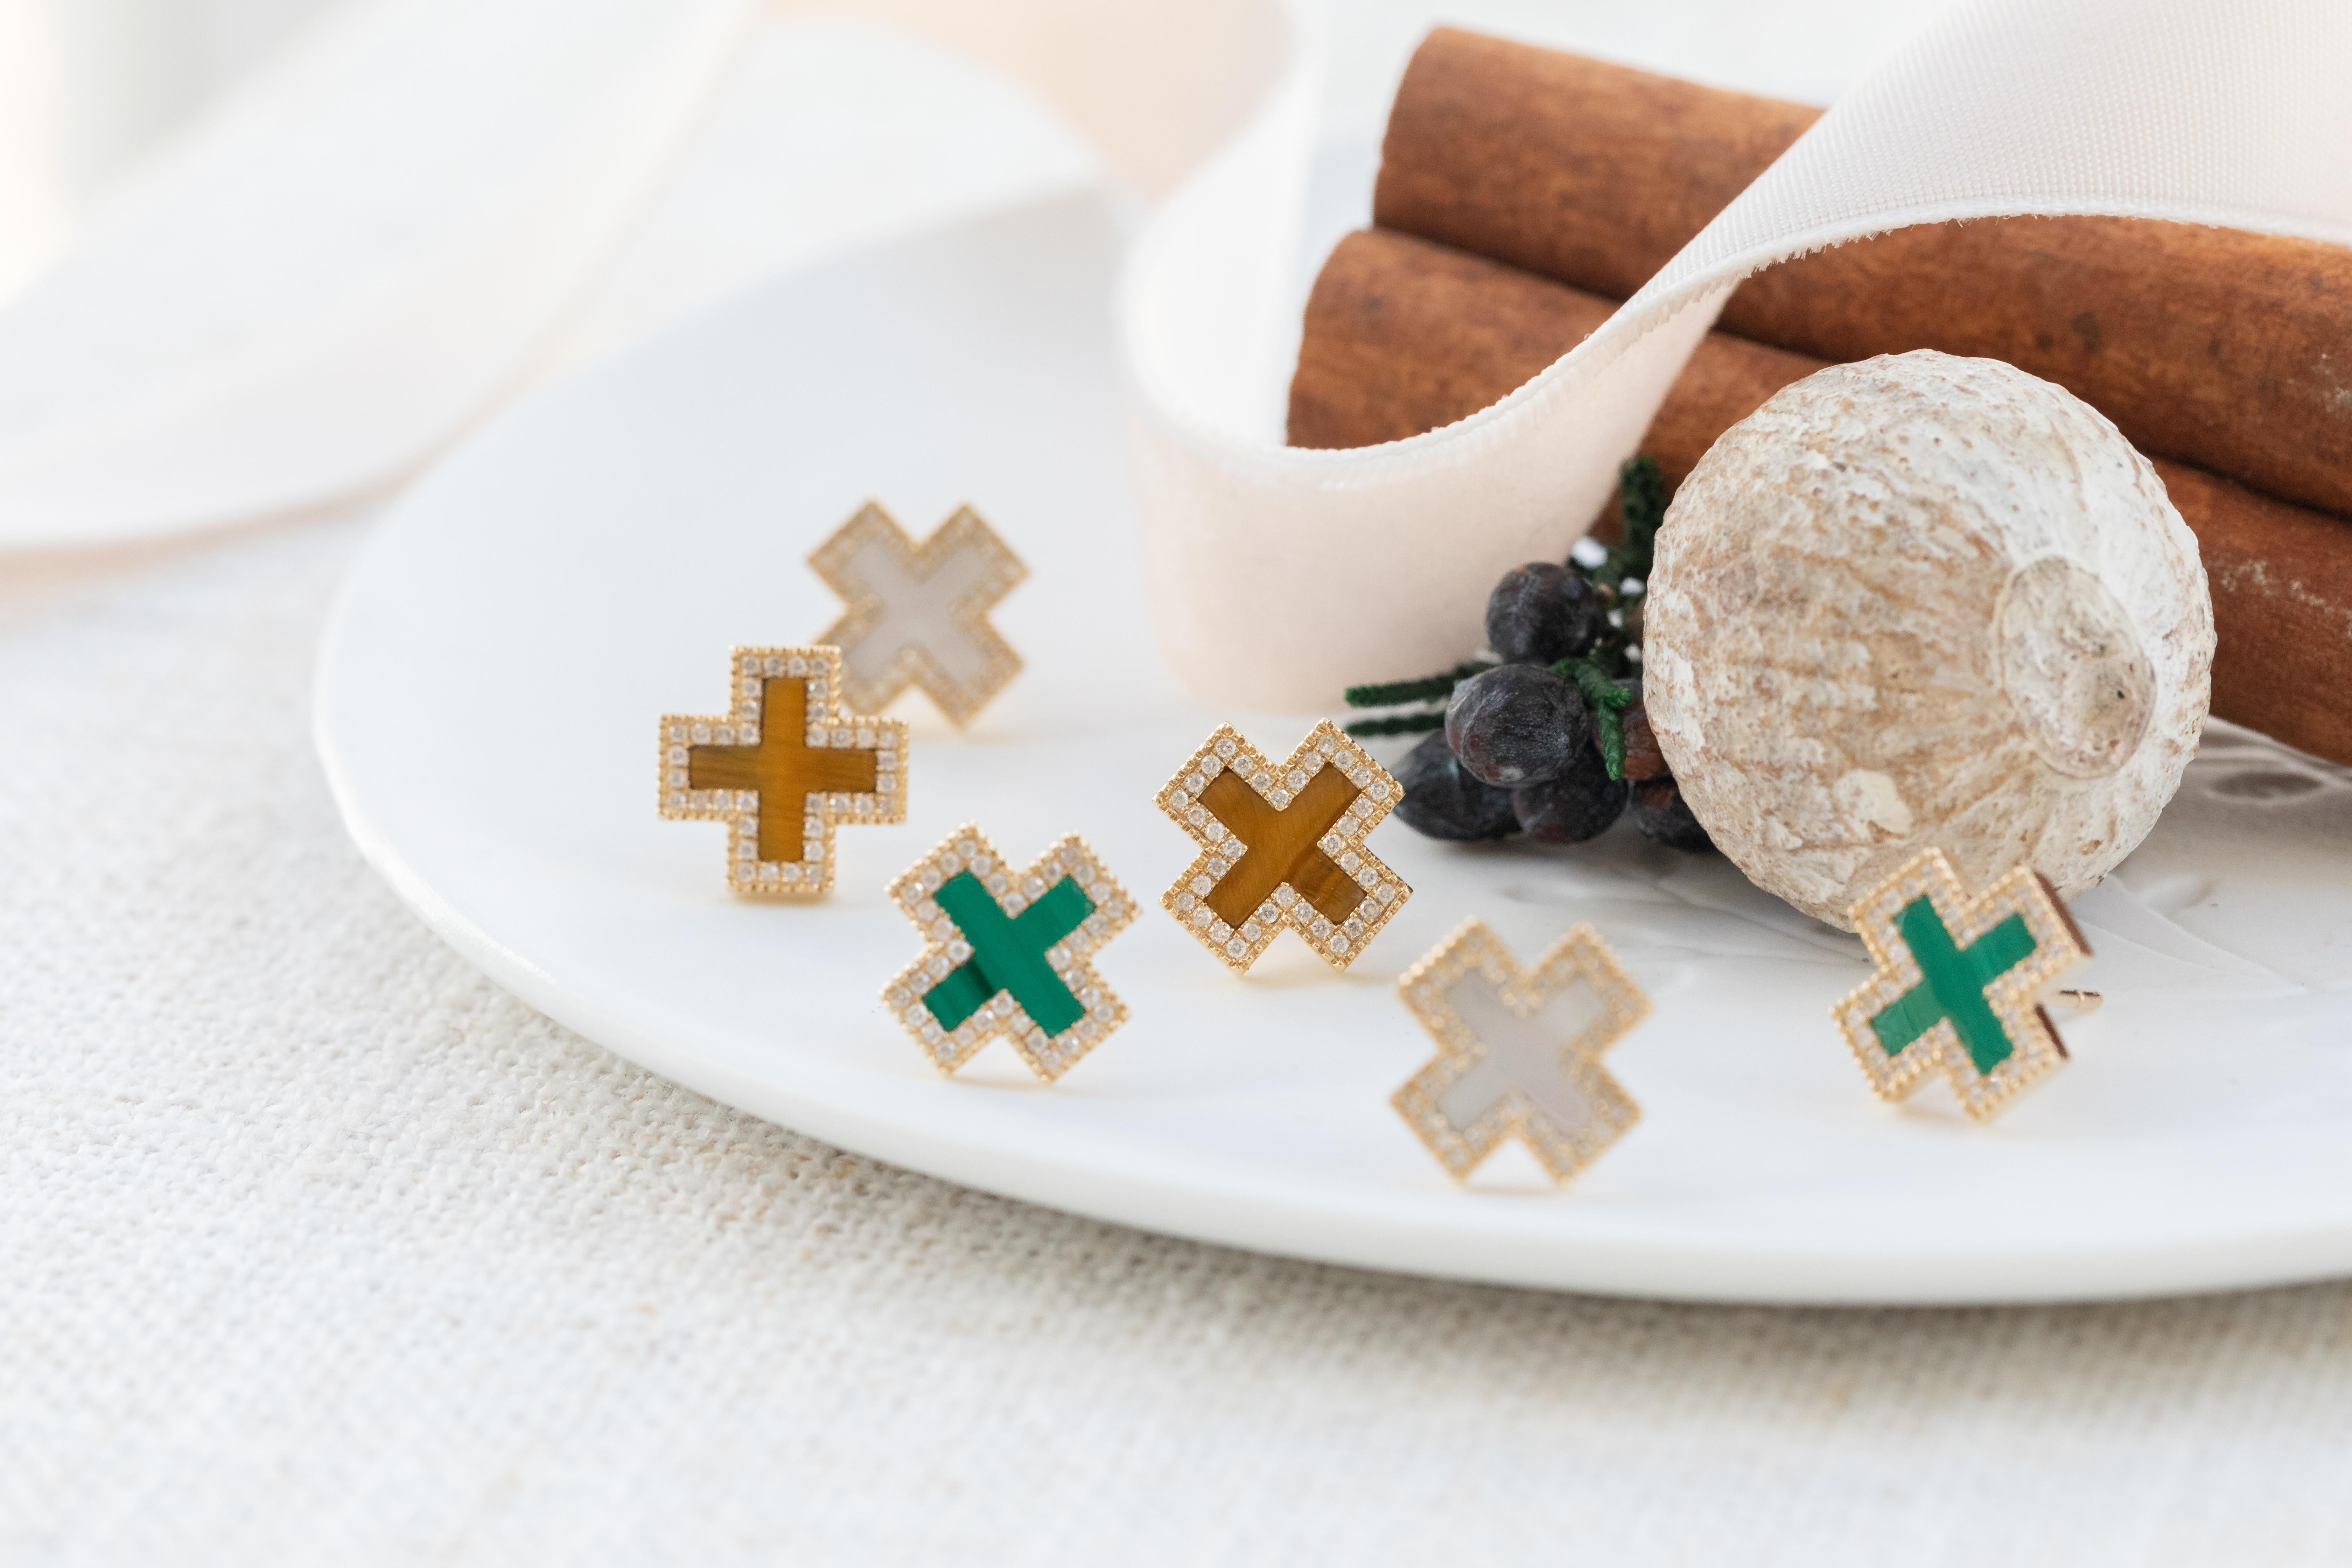 A twist on our best-selling Heirloom Stud Earrings, the Pave Malachite Inlay Heirloom Studs are a classic staple. These fun classics feature hand-cut malachite surrounded by diamonds to fill the ear.

The GATES Collection by M. Flynn is a jewelry